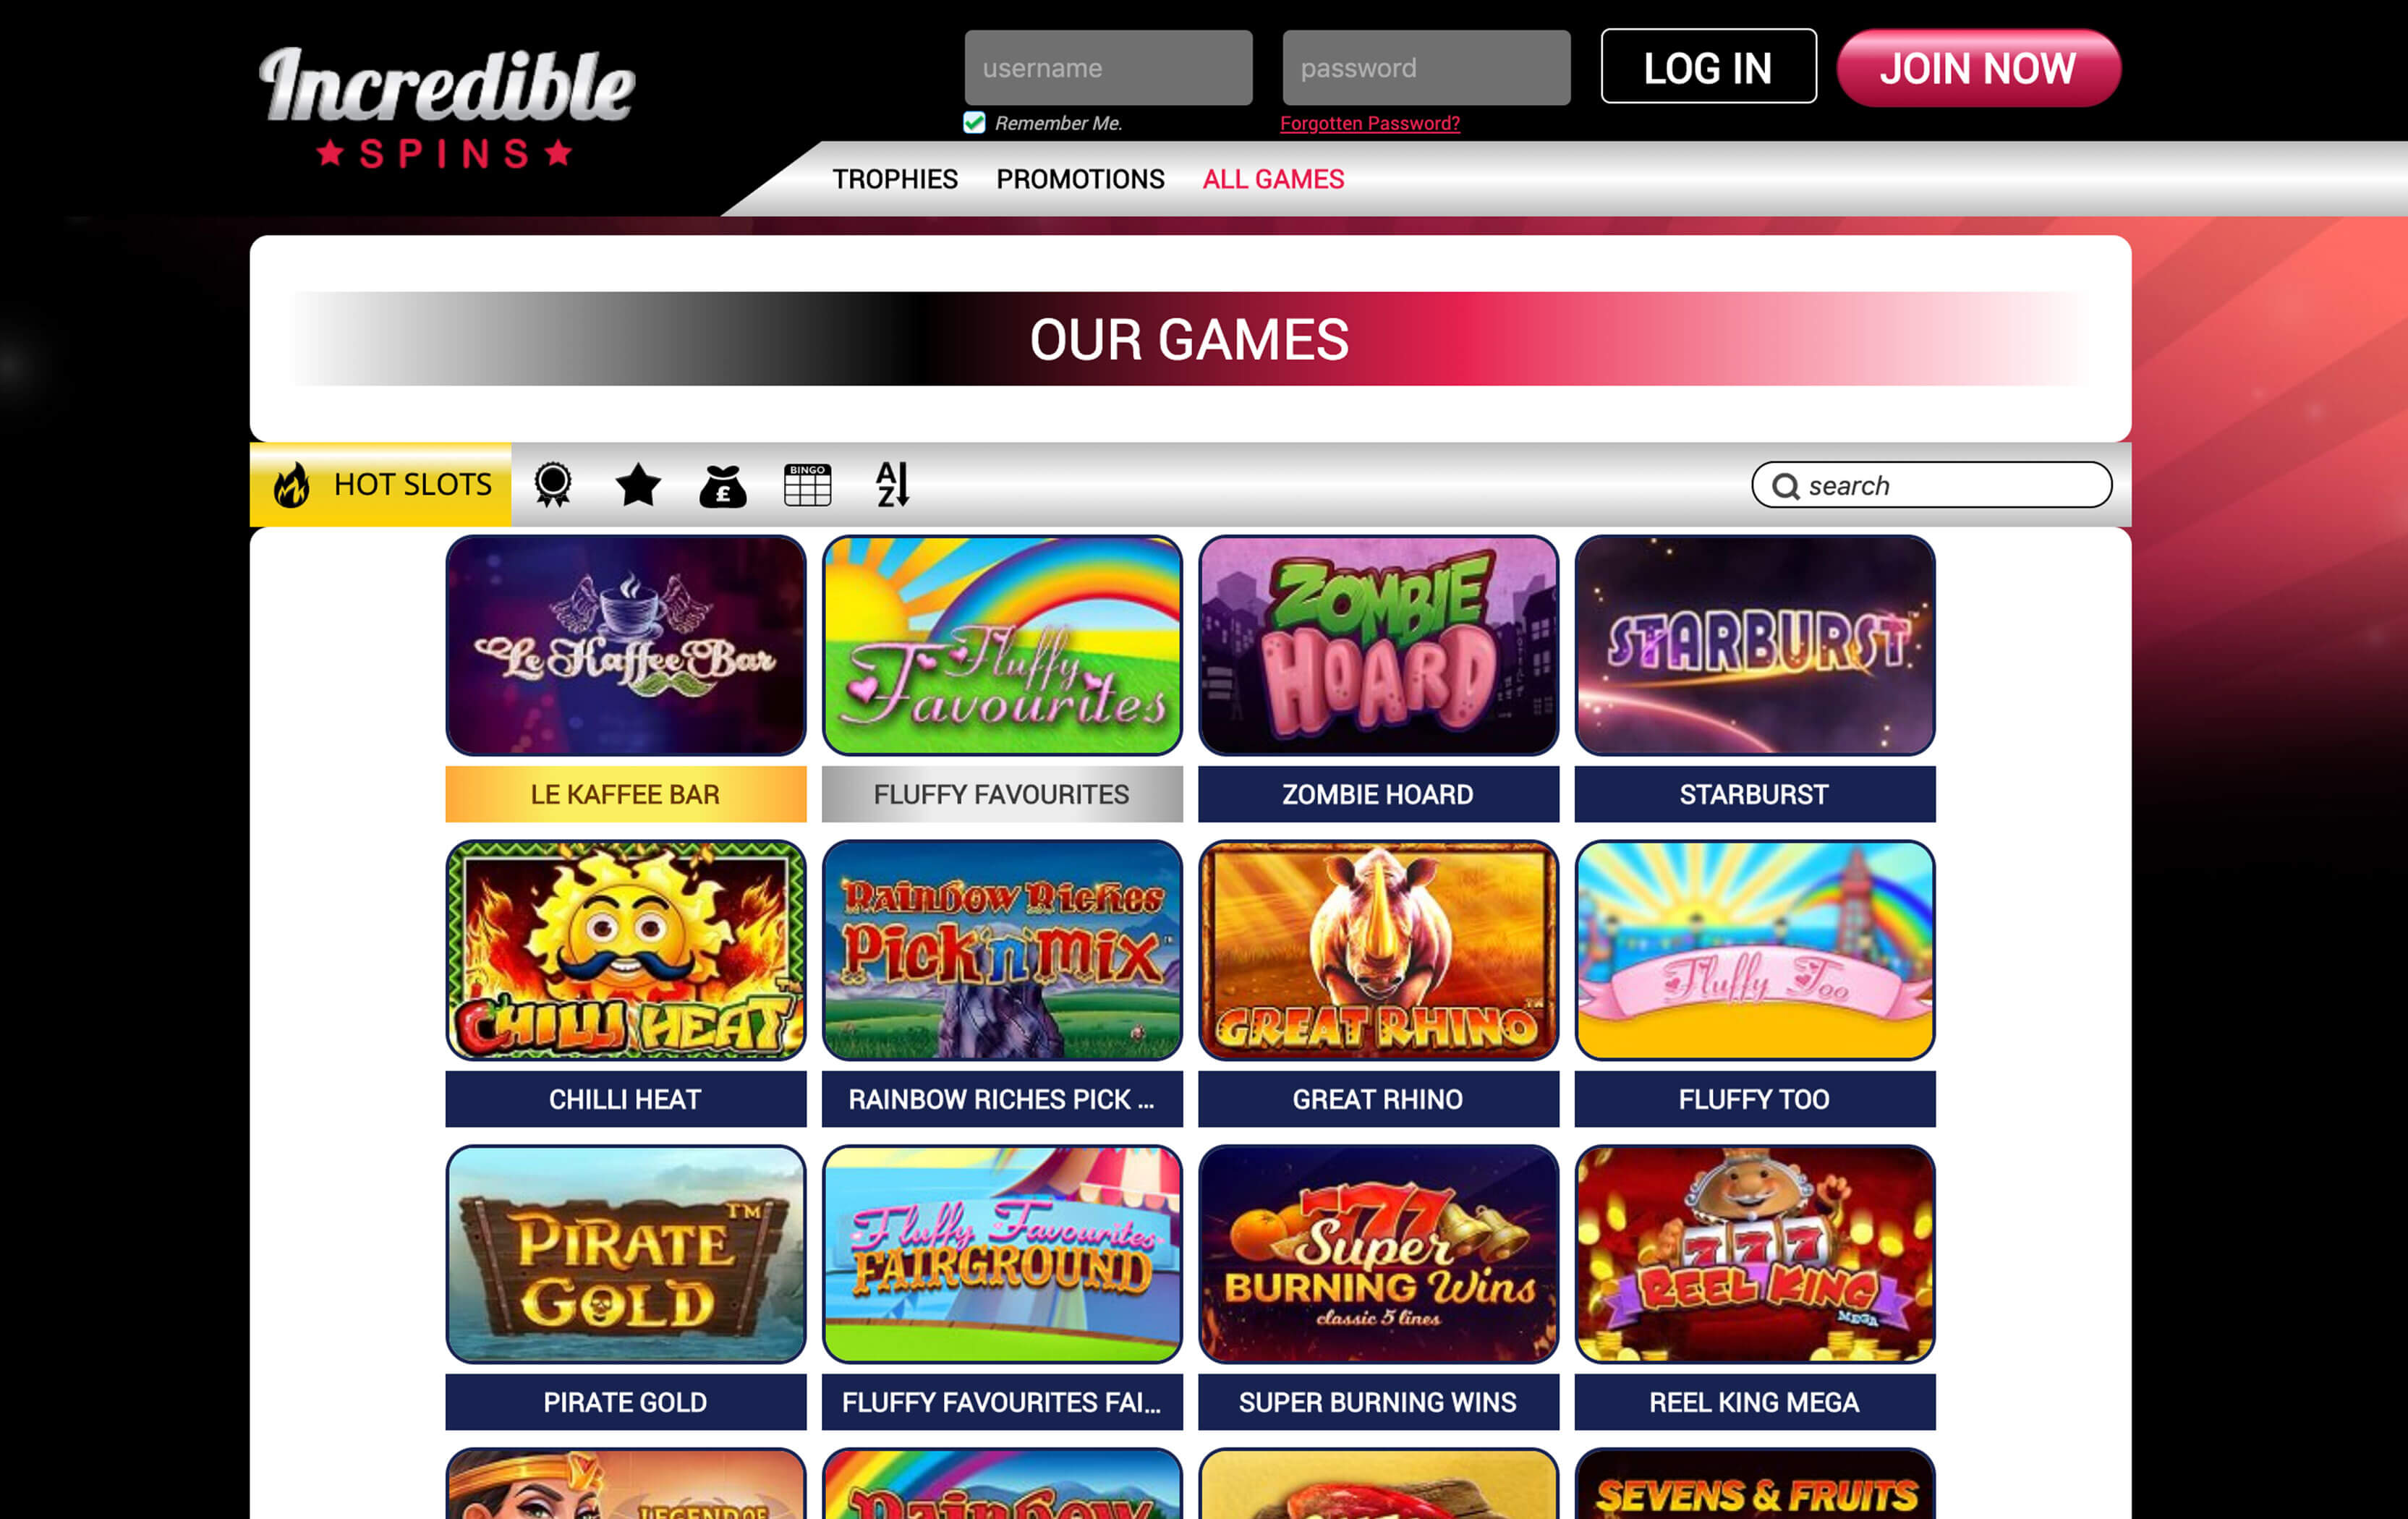 Incredible Spins Casino games and slots